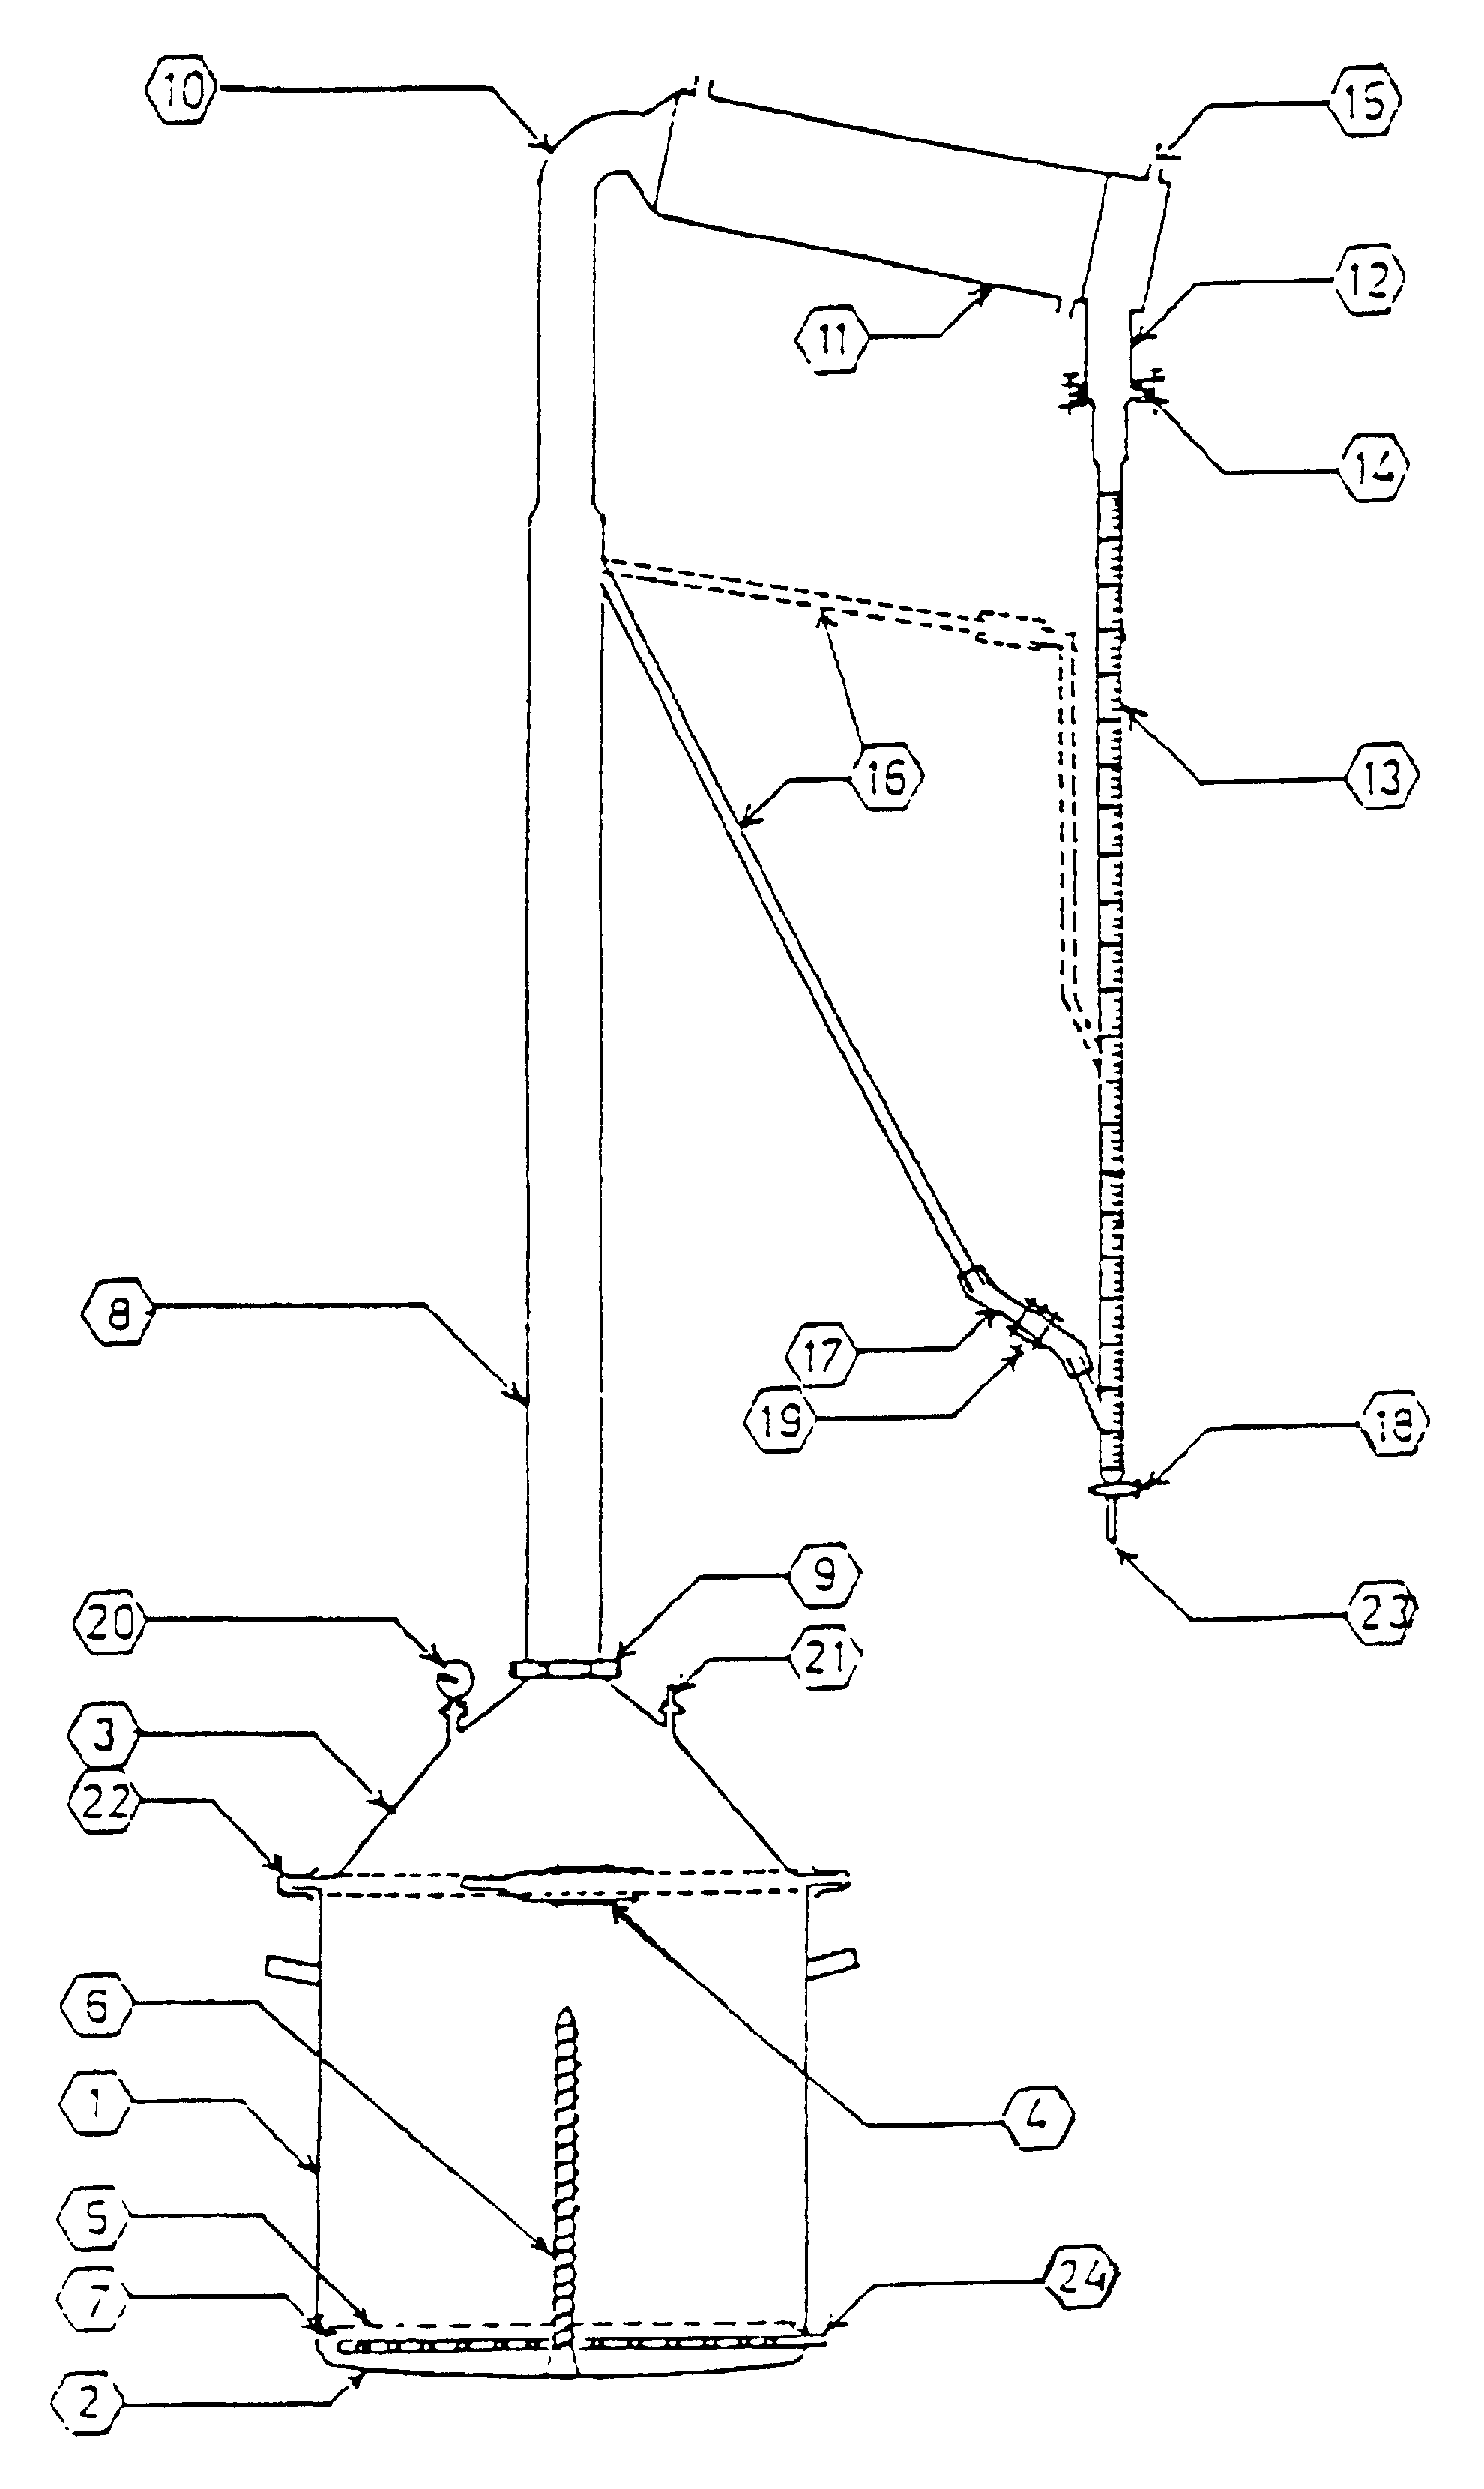 Simple portable mini distillation apparatus for the production of essential oils and hydrosols